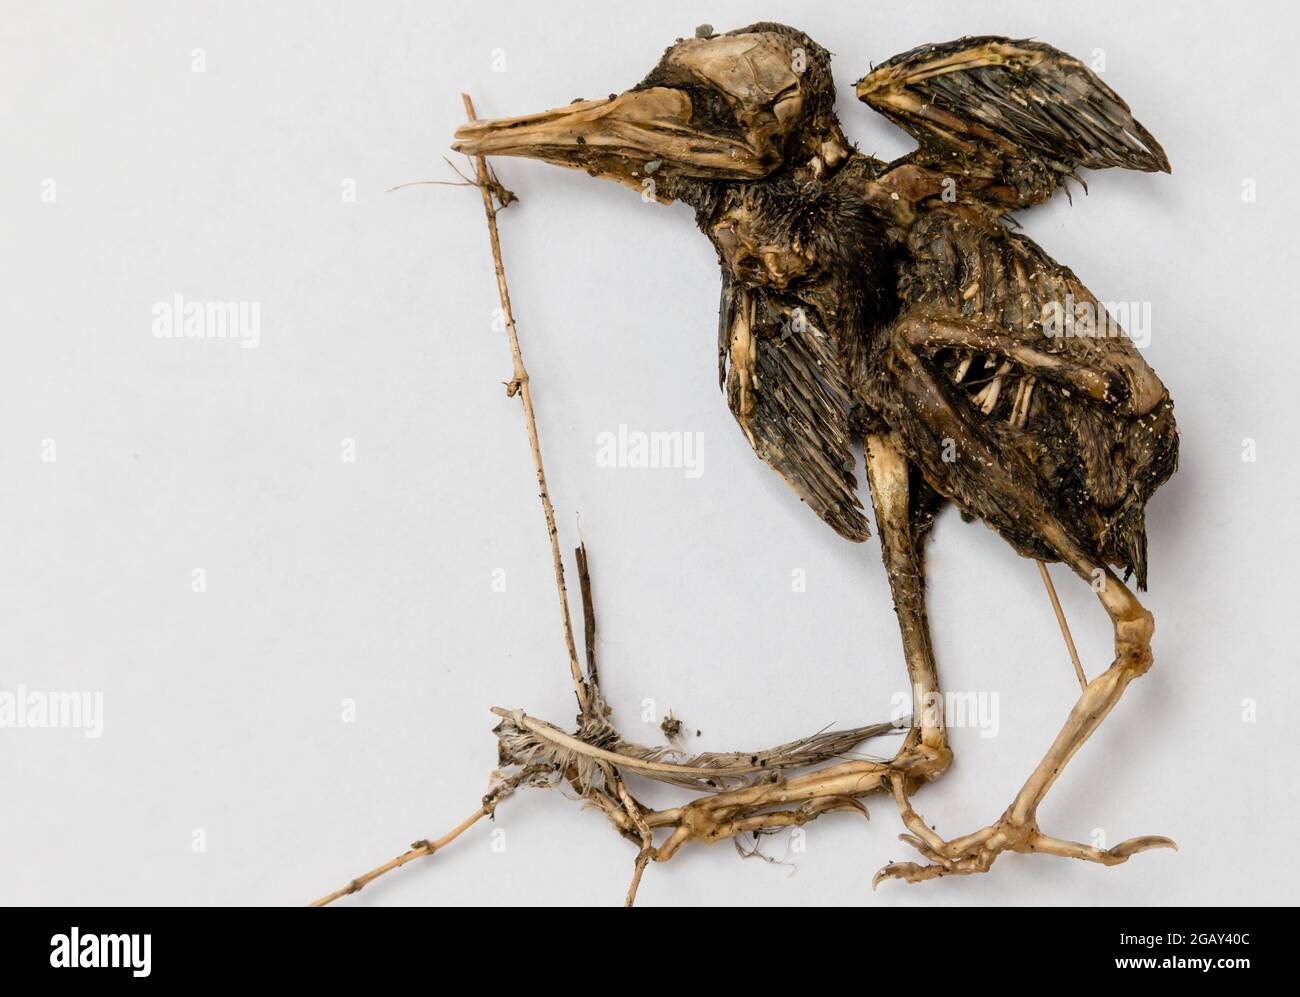 The partially decomposed decayed remains and skeleton of a garden bird on white background Stock Photo